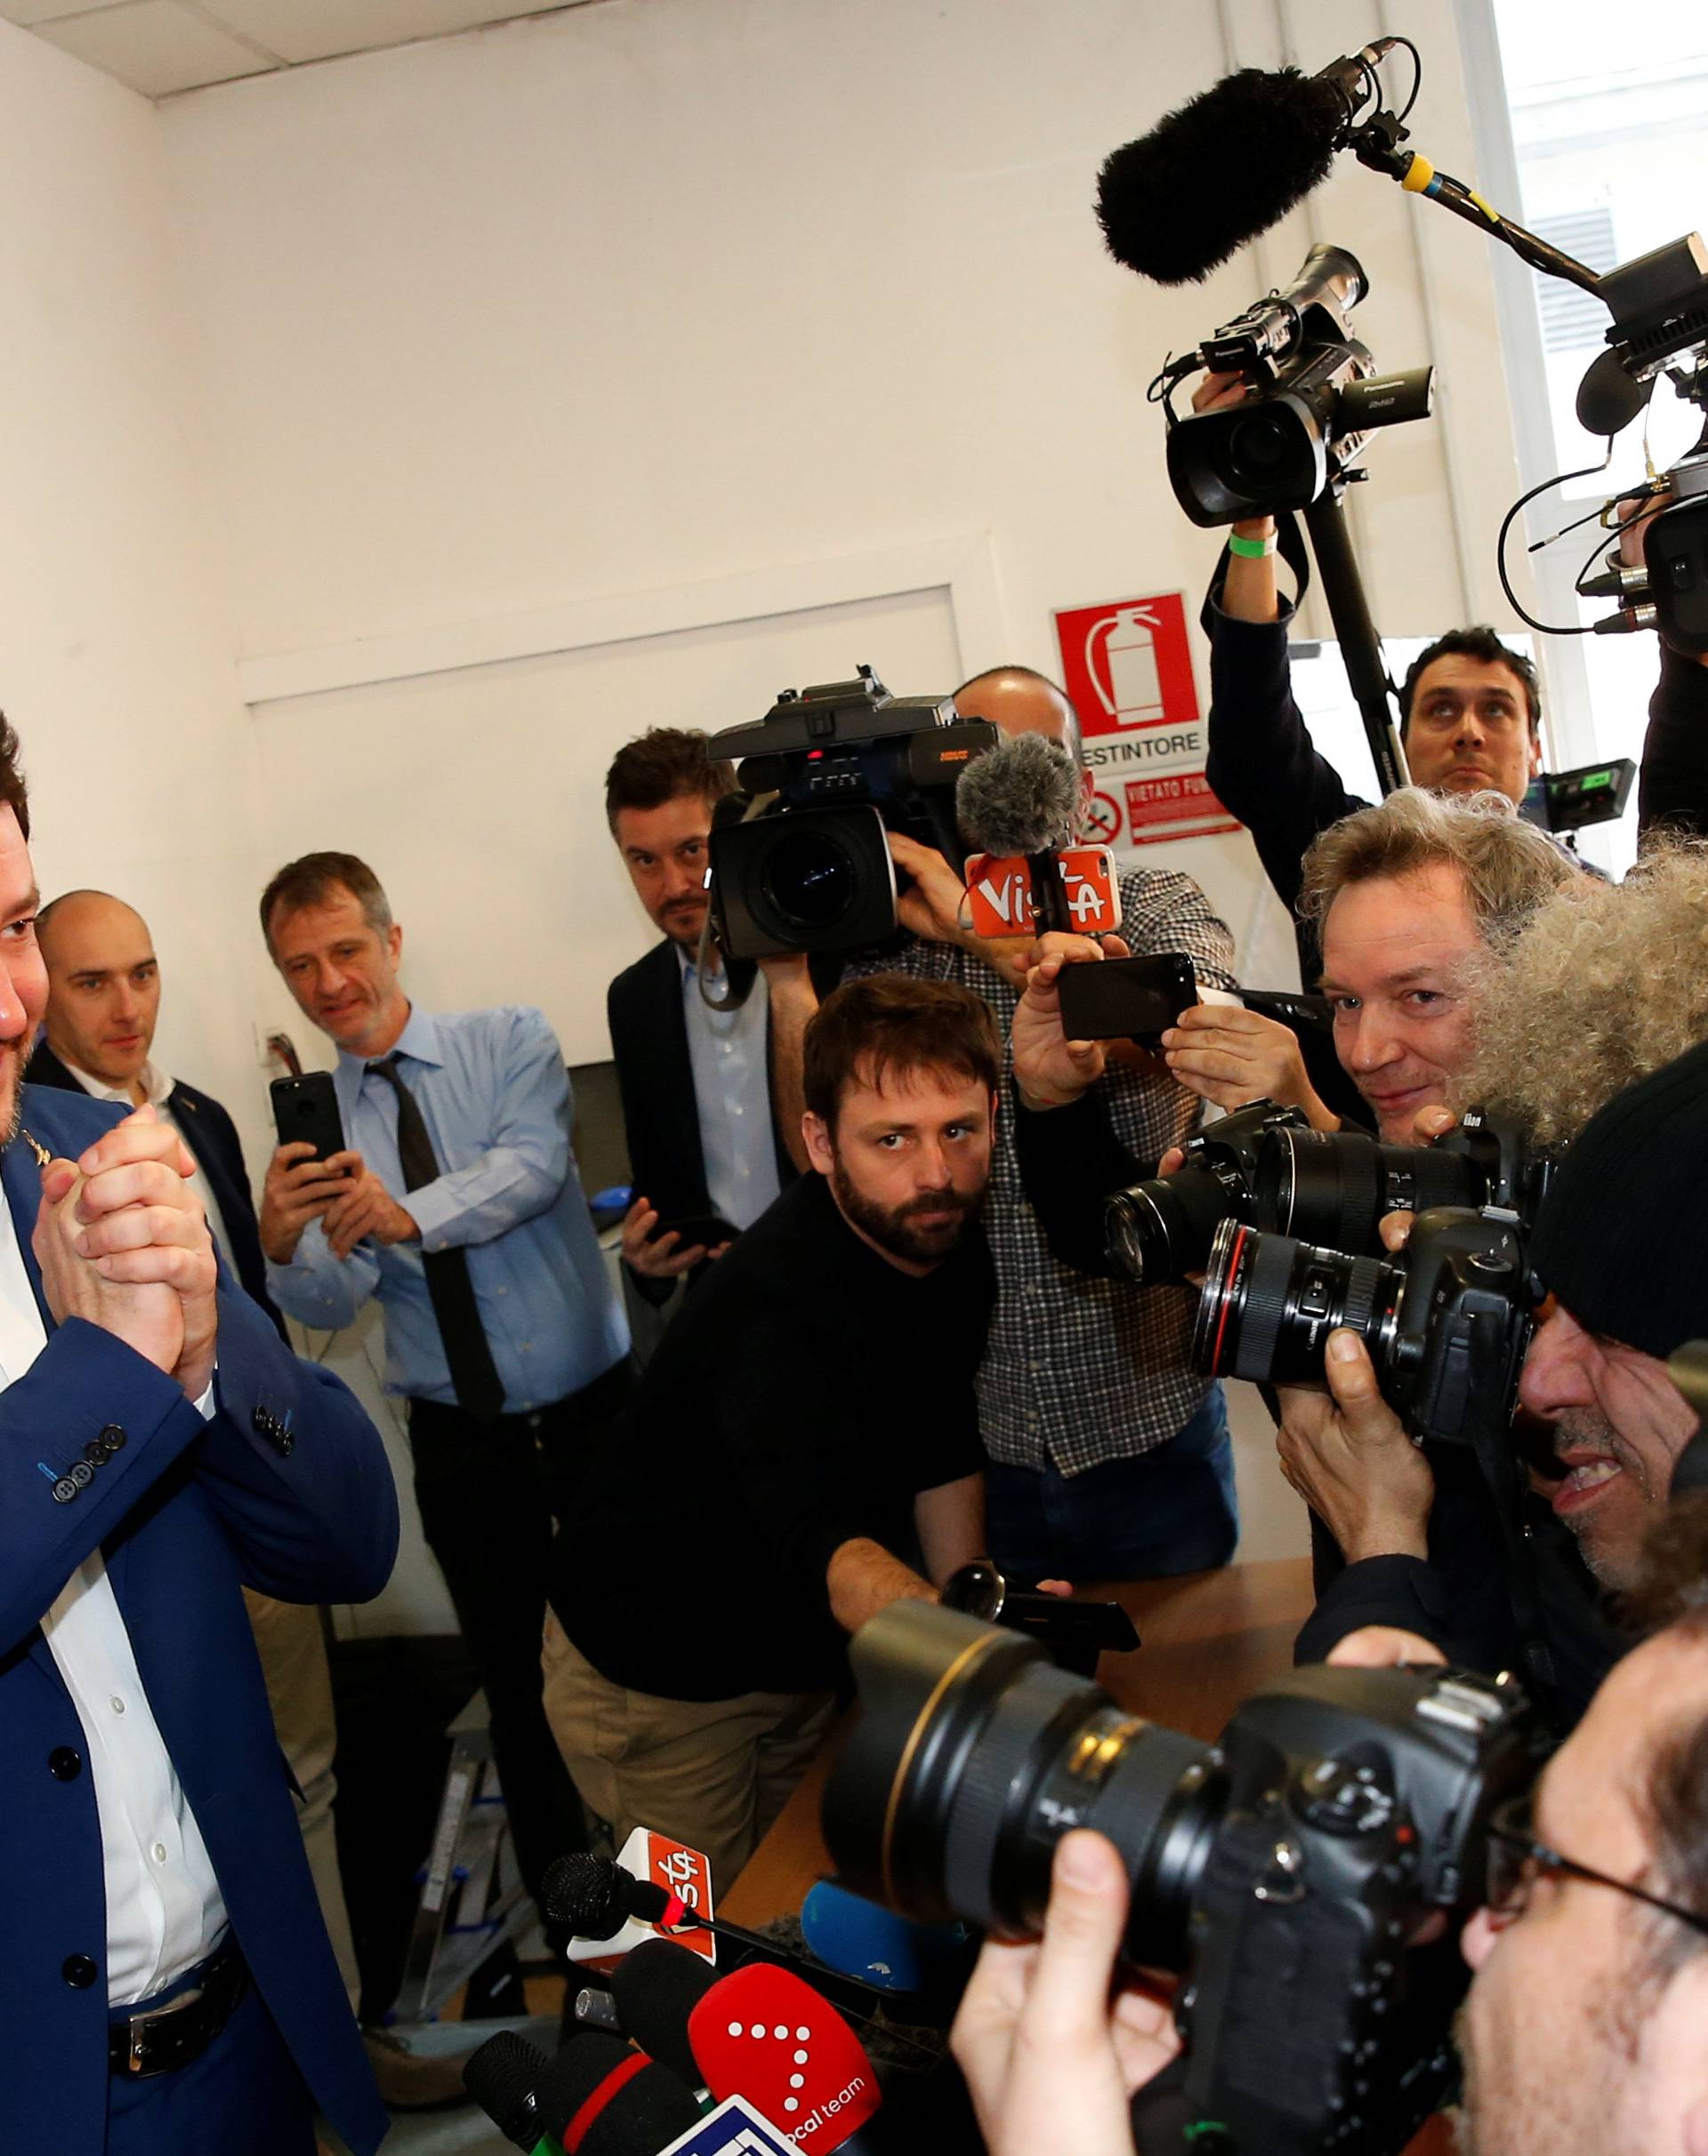 Northern League party leader Matteo Salvini poses at the end of a news conference, the day after Italy's parliamentary elections, in Milan